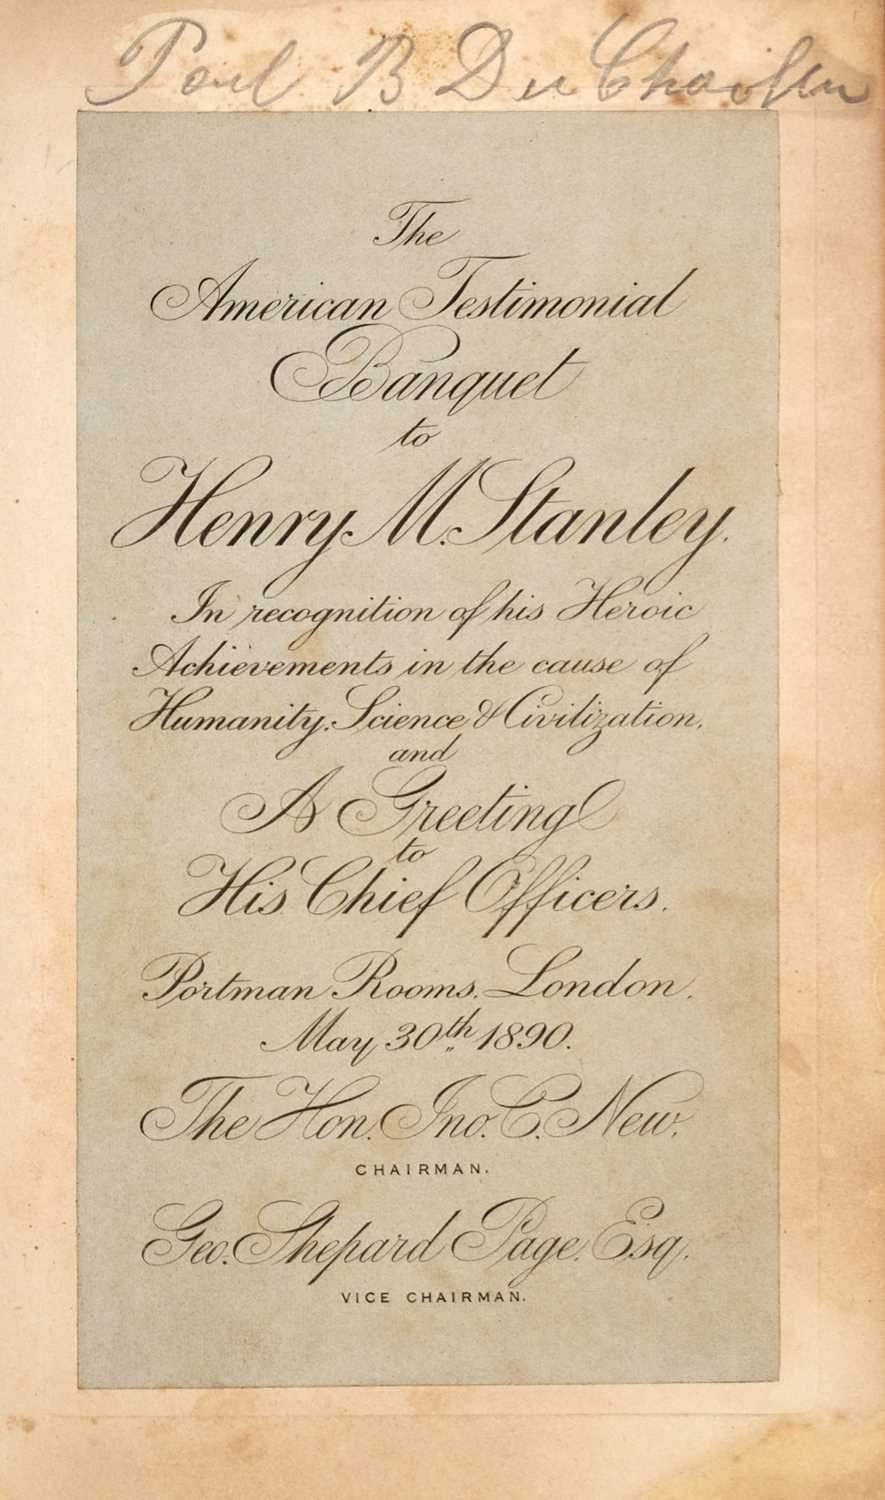 Lot 208 - The American Testimonial Banquet to Henry M. Stanley signed by Stanley and others